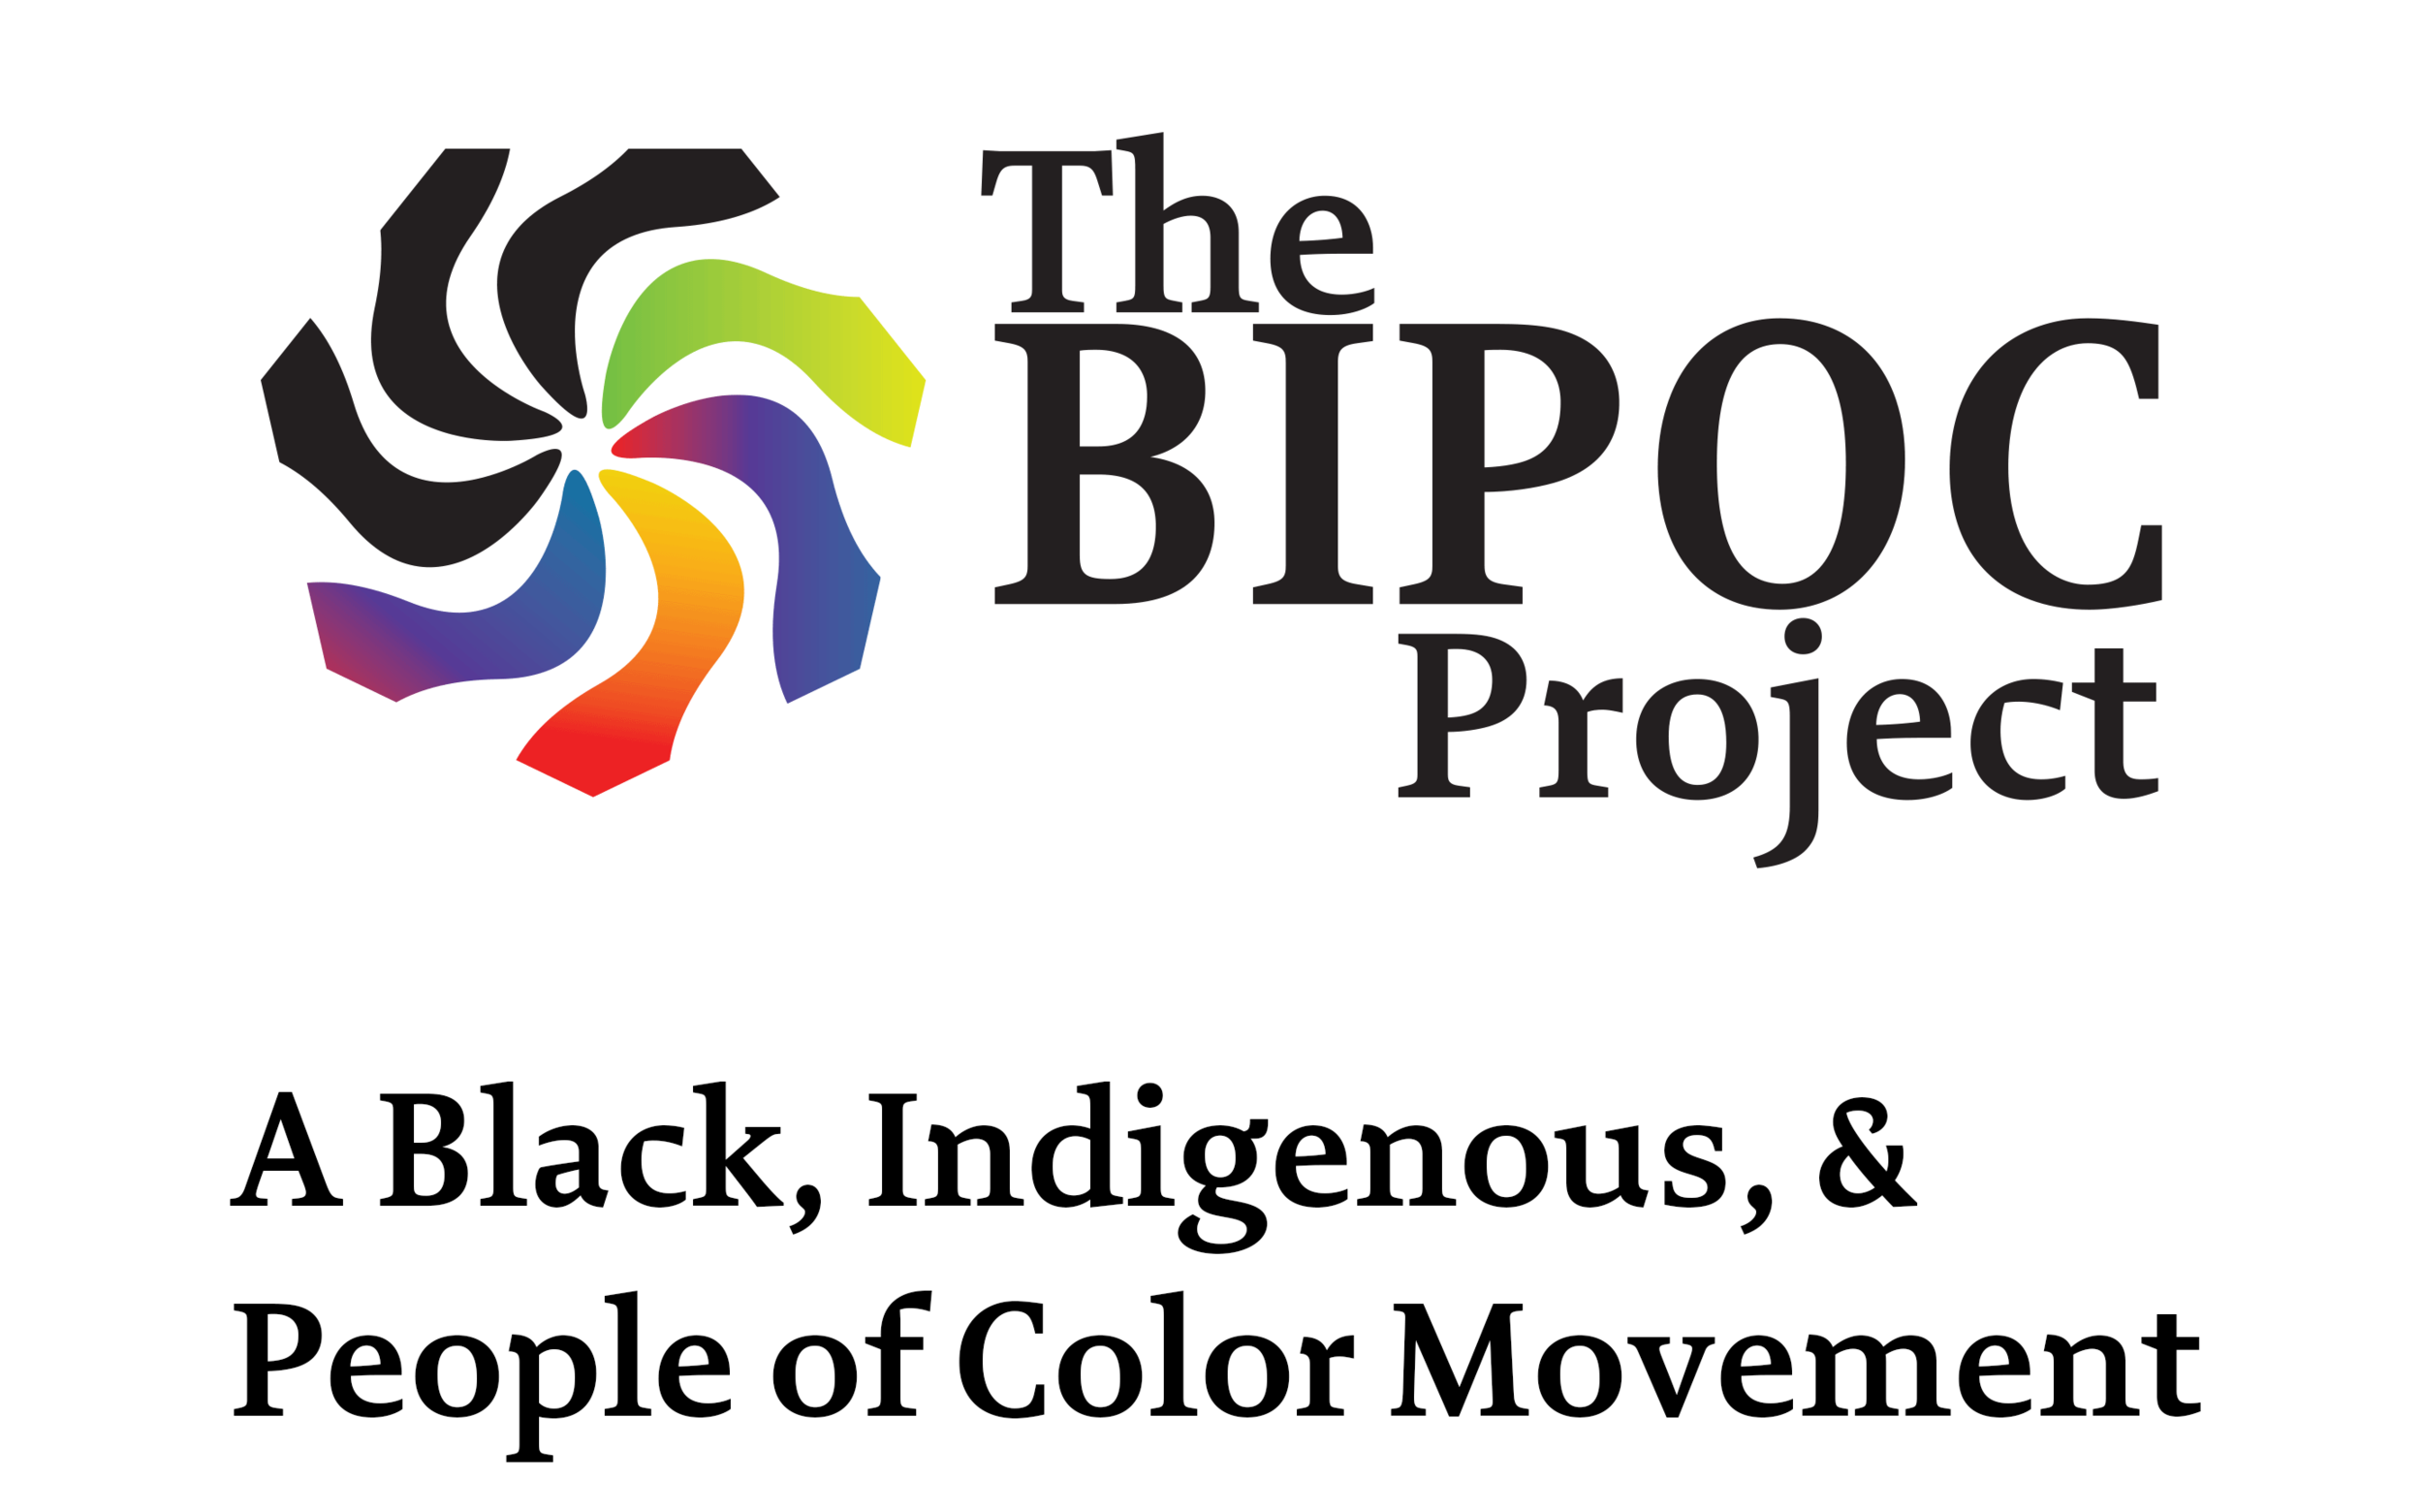 The BIPOC Project